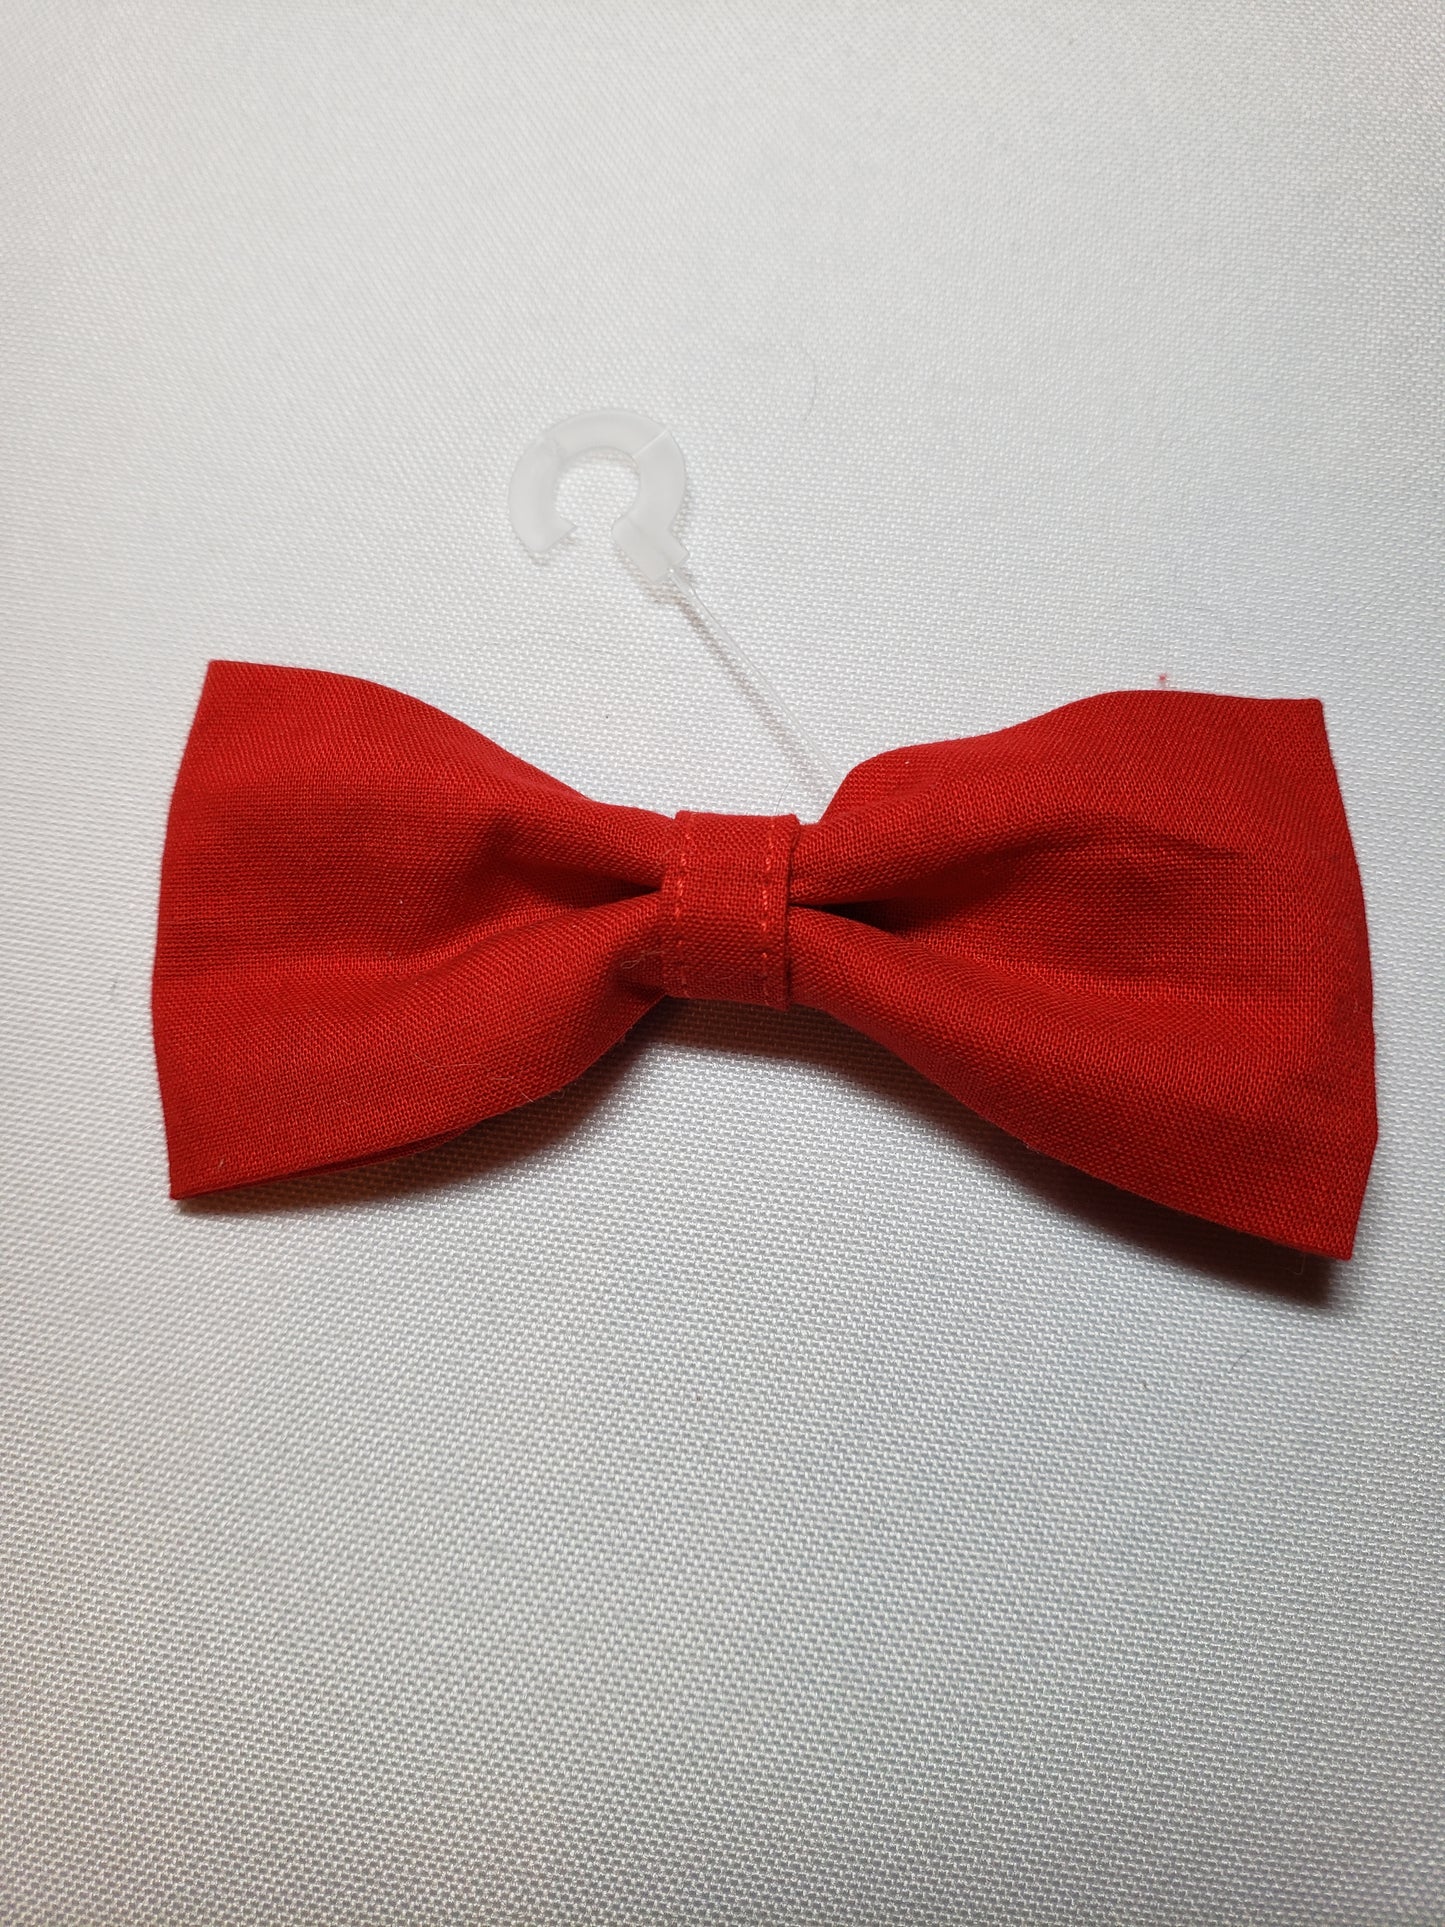 Bright Red Over-the-Collar Pet Bow / Bowtie (Old Style)